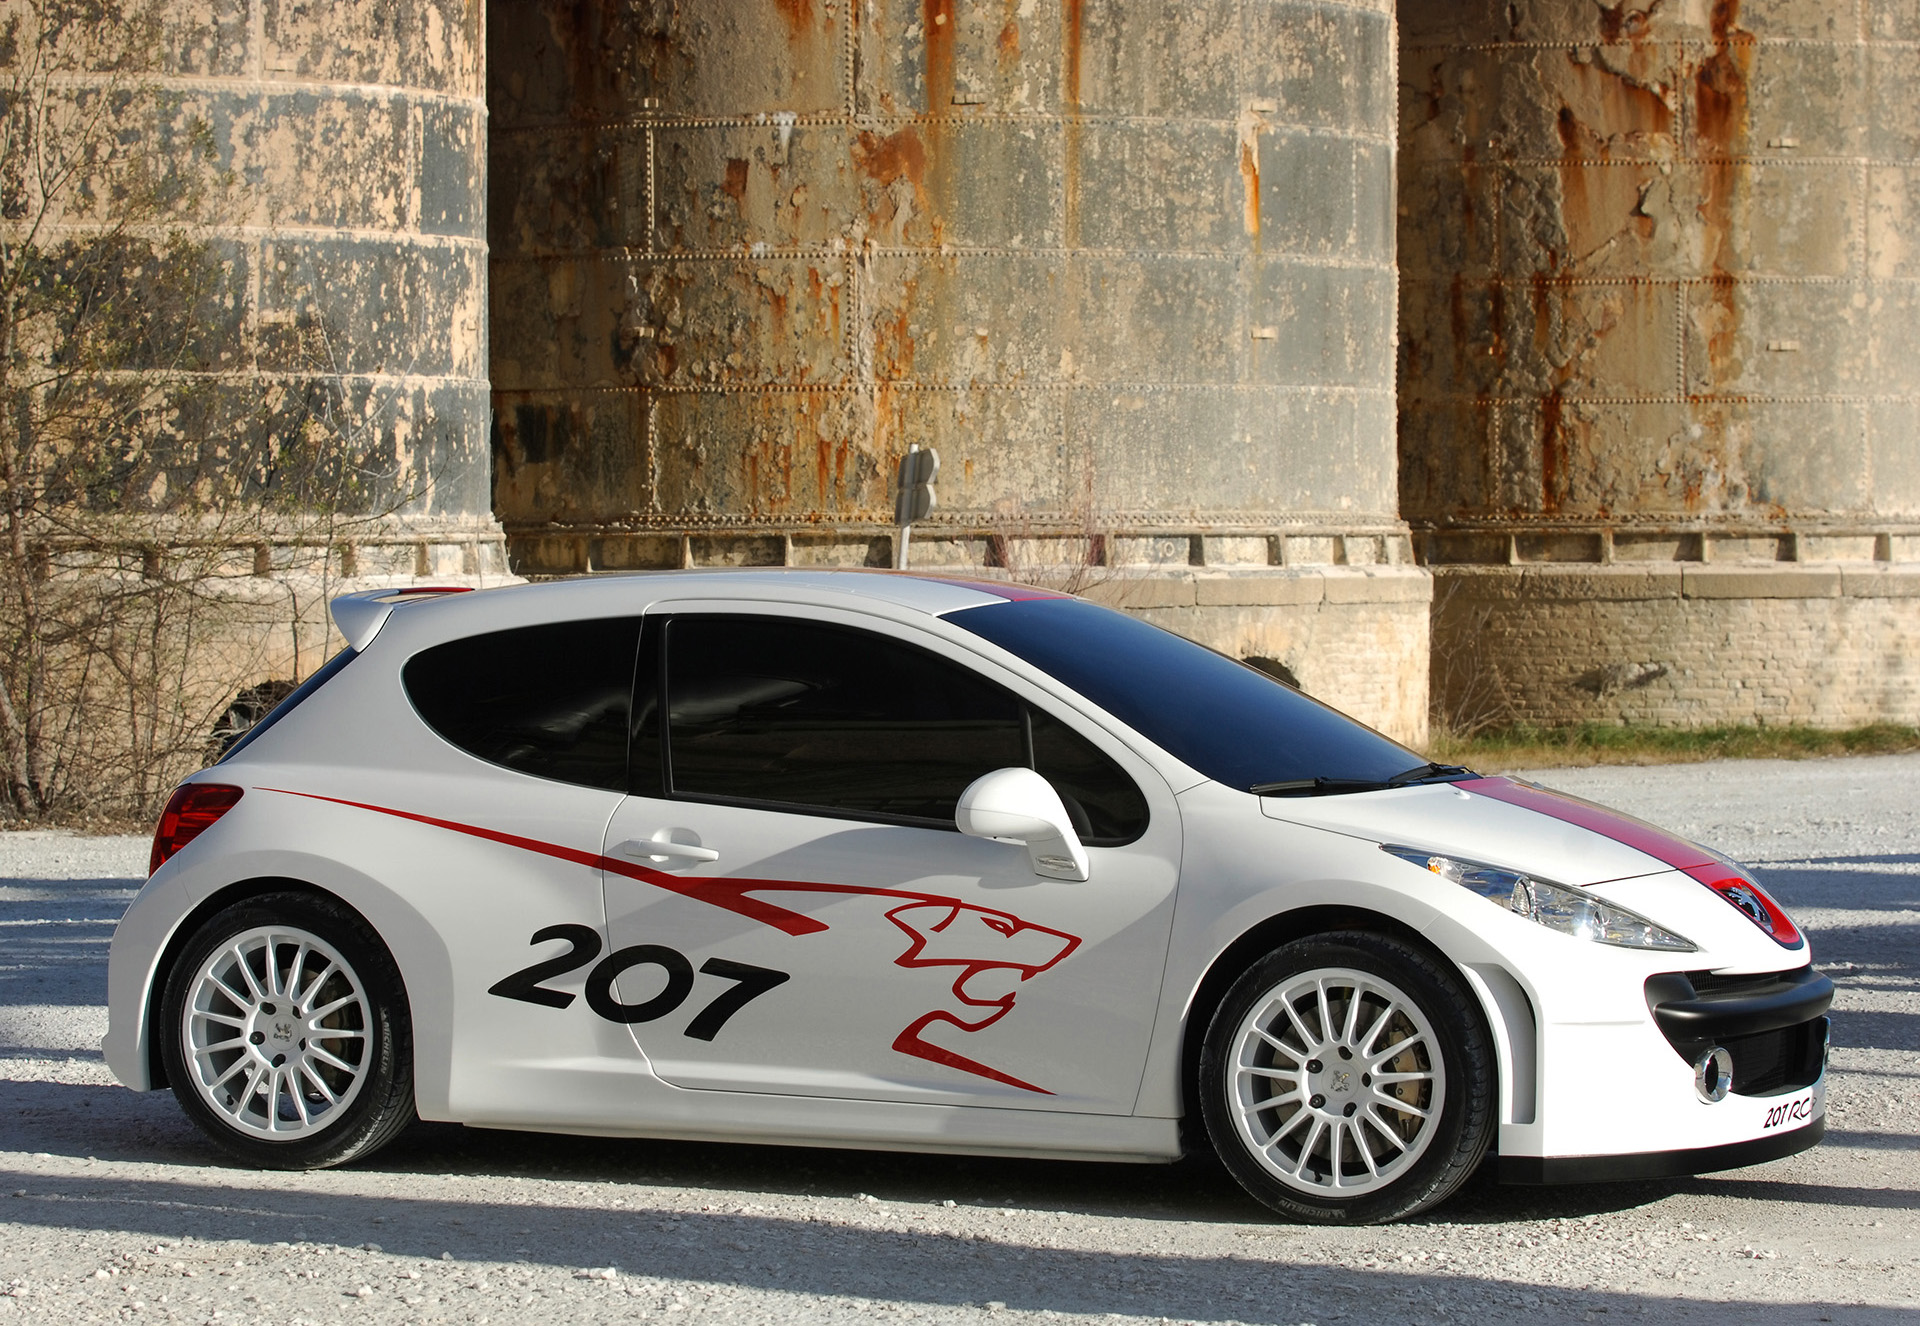 Peugeot 207 RCup picture 4 of 10, MY 2006, size:1920x1326.